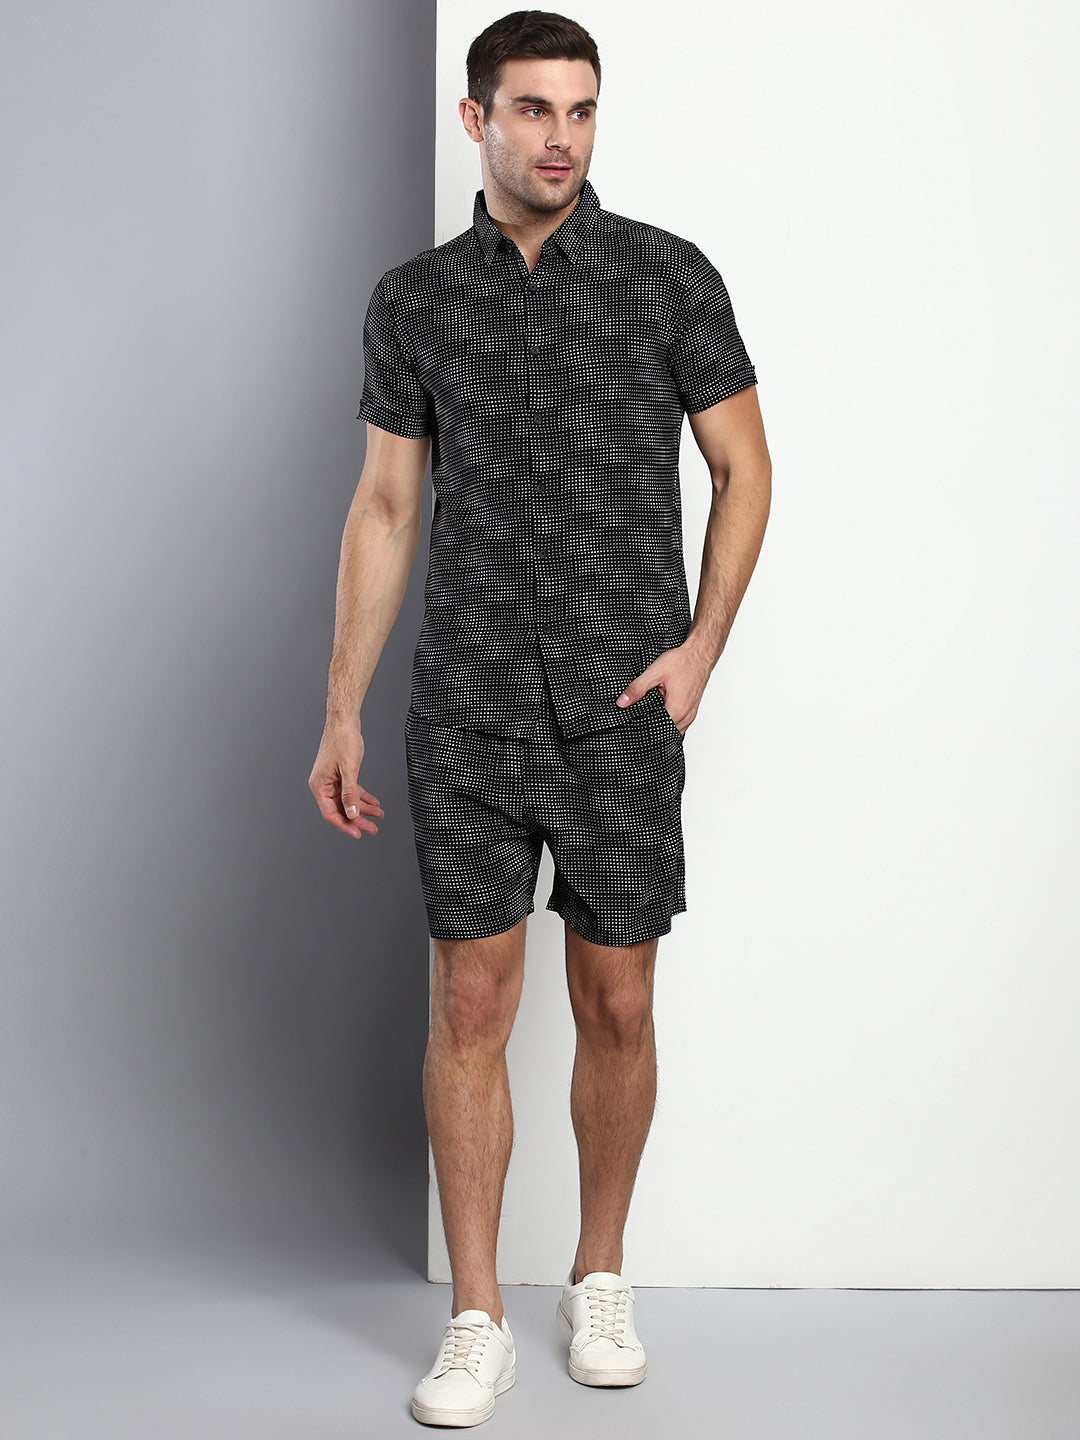 How to Wear Men's Co-Ord Sets? Top Tips for Guys - Man2Man